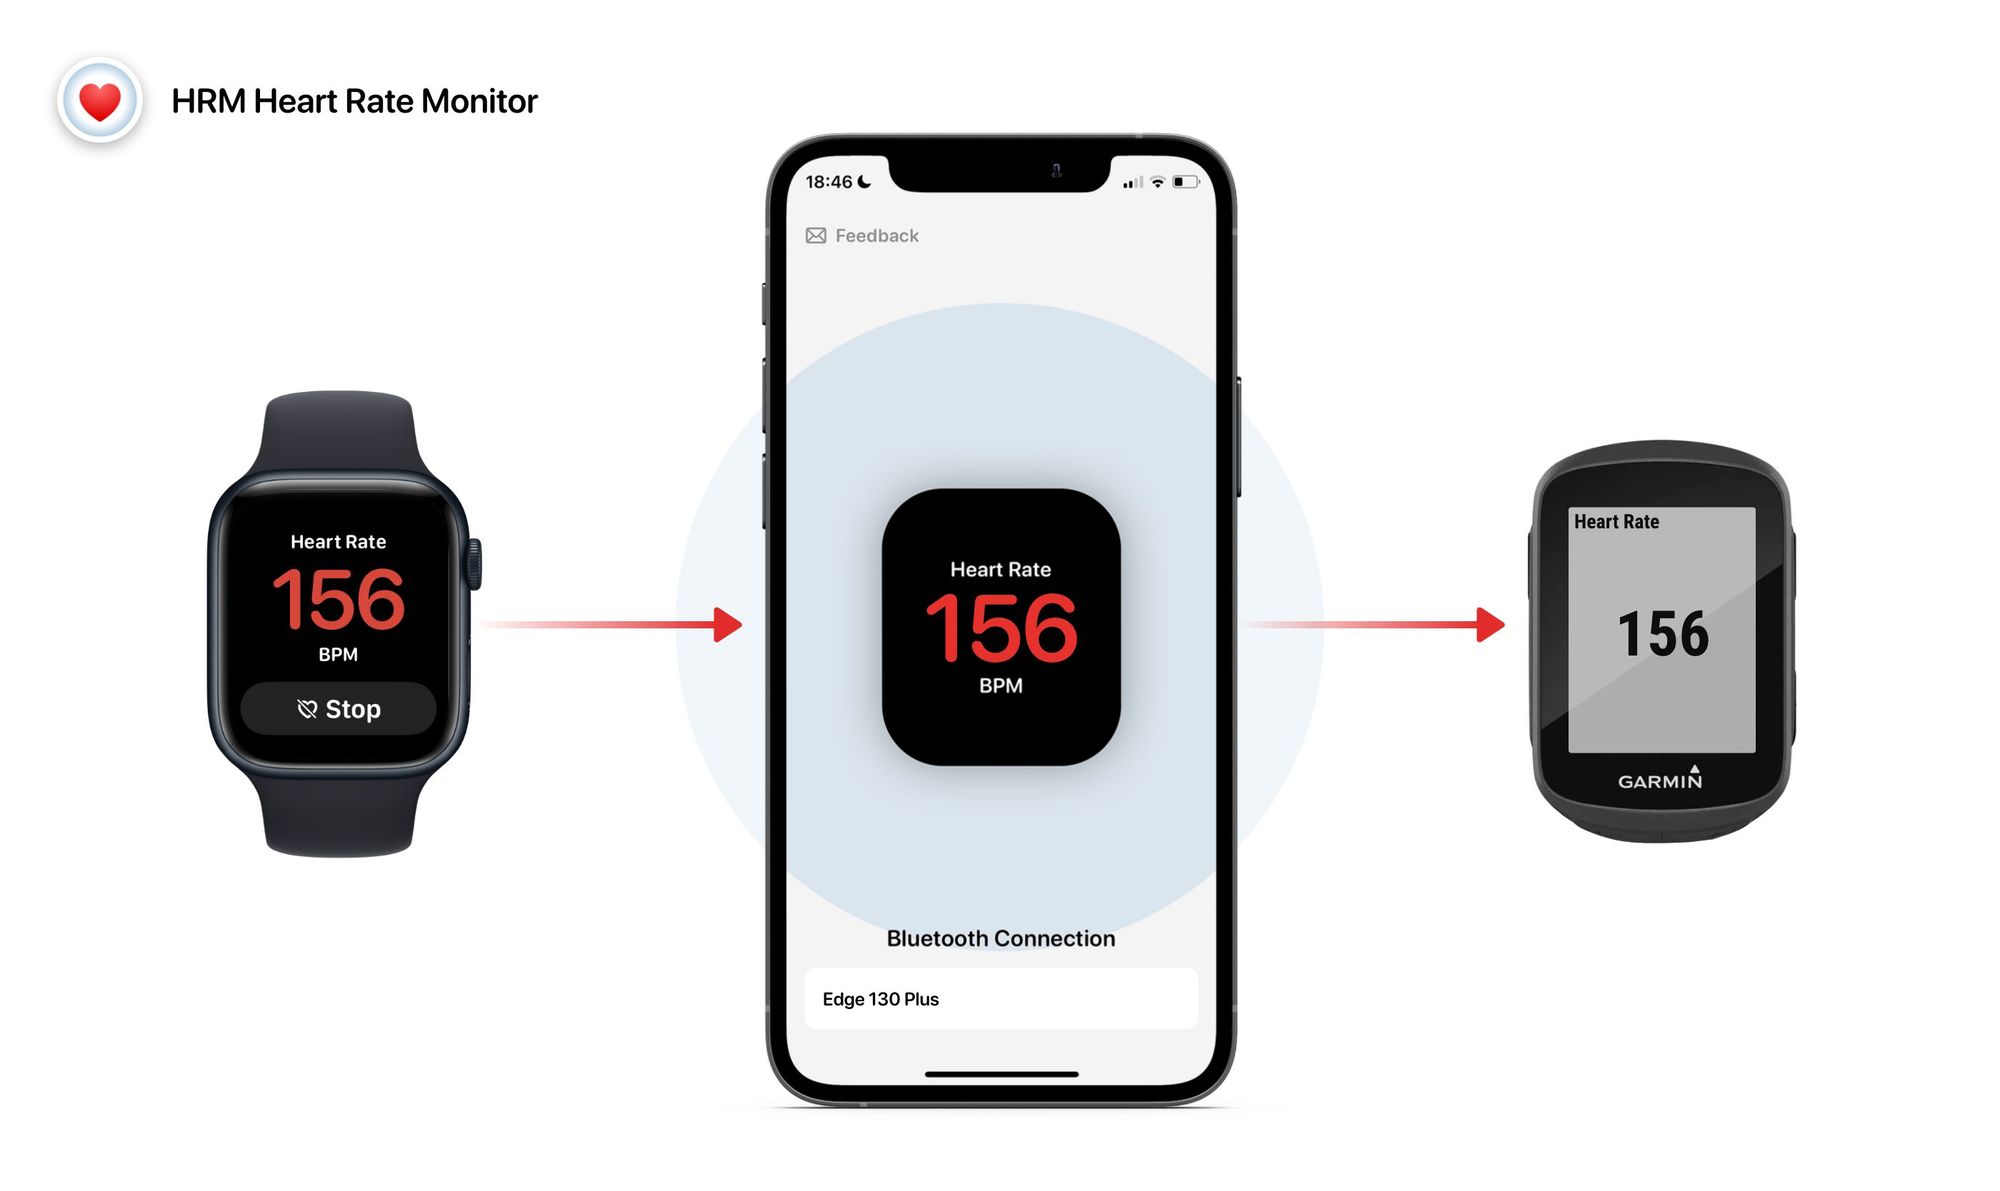 HRM Heart Rate Monitor User Guide